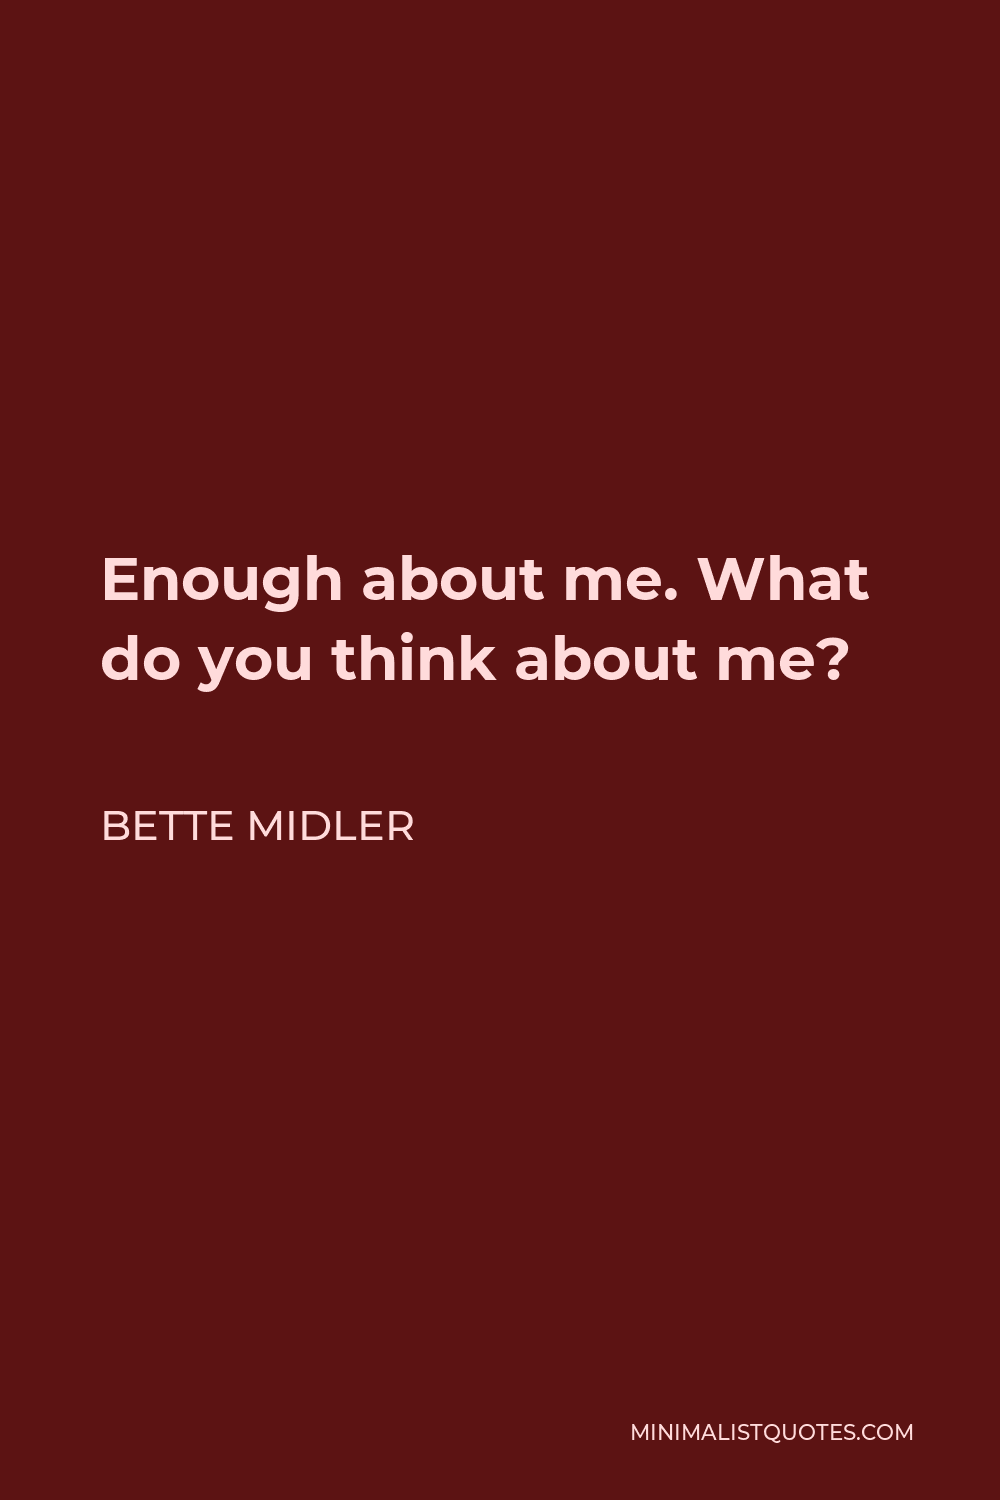 Bette Midler Quote - Enough about me. What do you think about me?